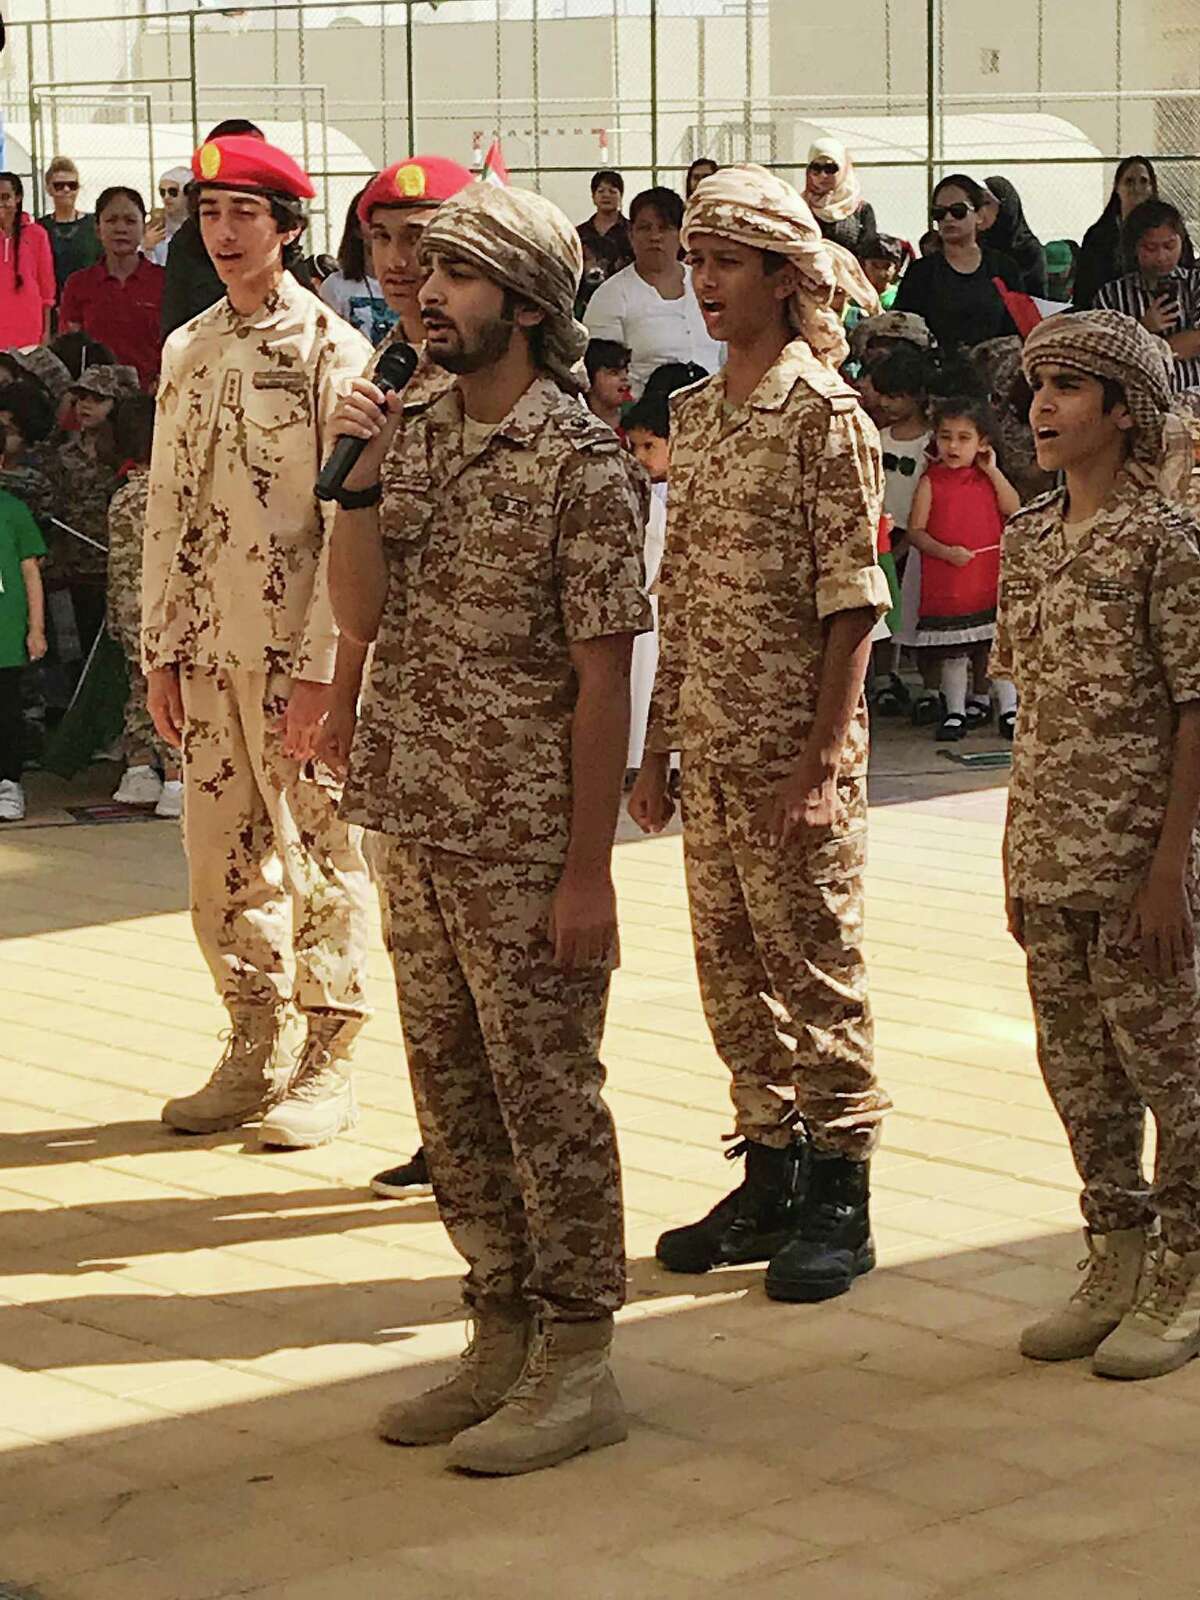 Ninth-grade boys at a school in the United Arab Emirates lead the singing of the national anthem before hoisting the flag -- something everyone was encouraged to do at precisely 11 a.m. on Nov. 1, Flag Day.